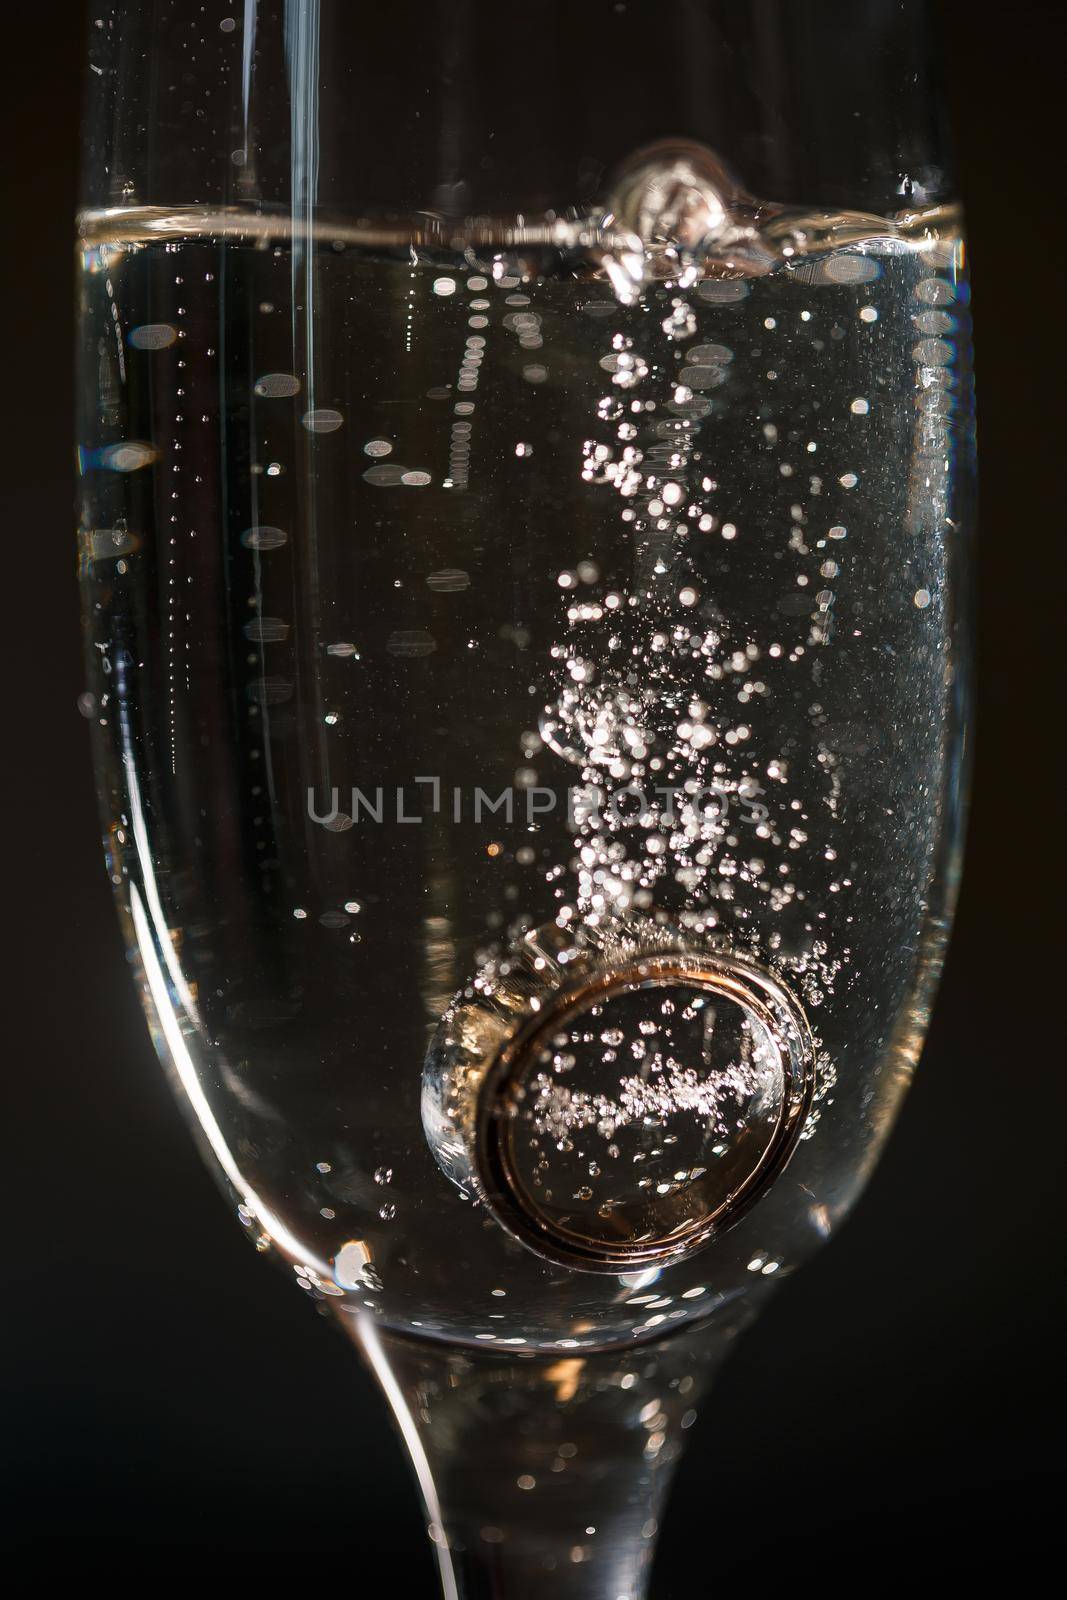 Gold precious wedding rings in a glass of sparkling champagne